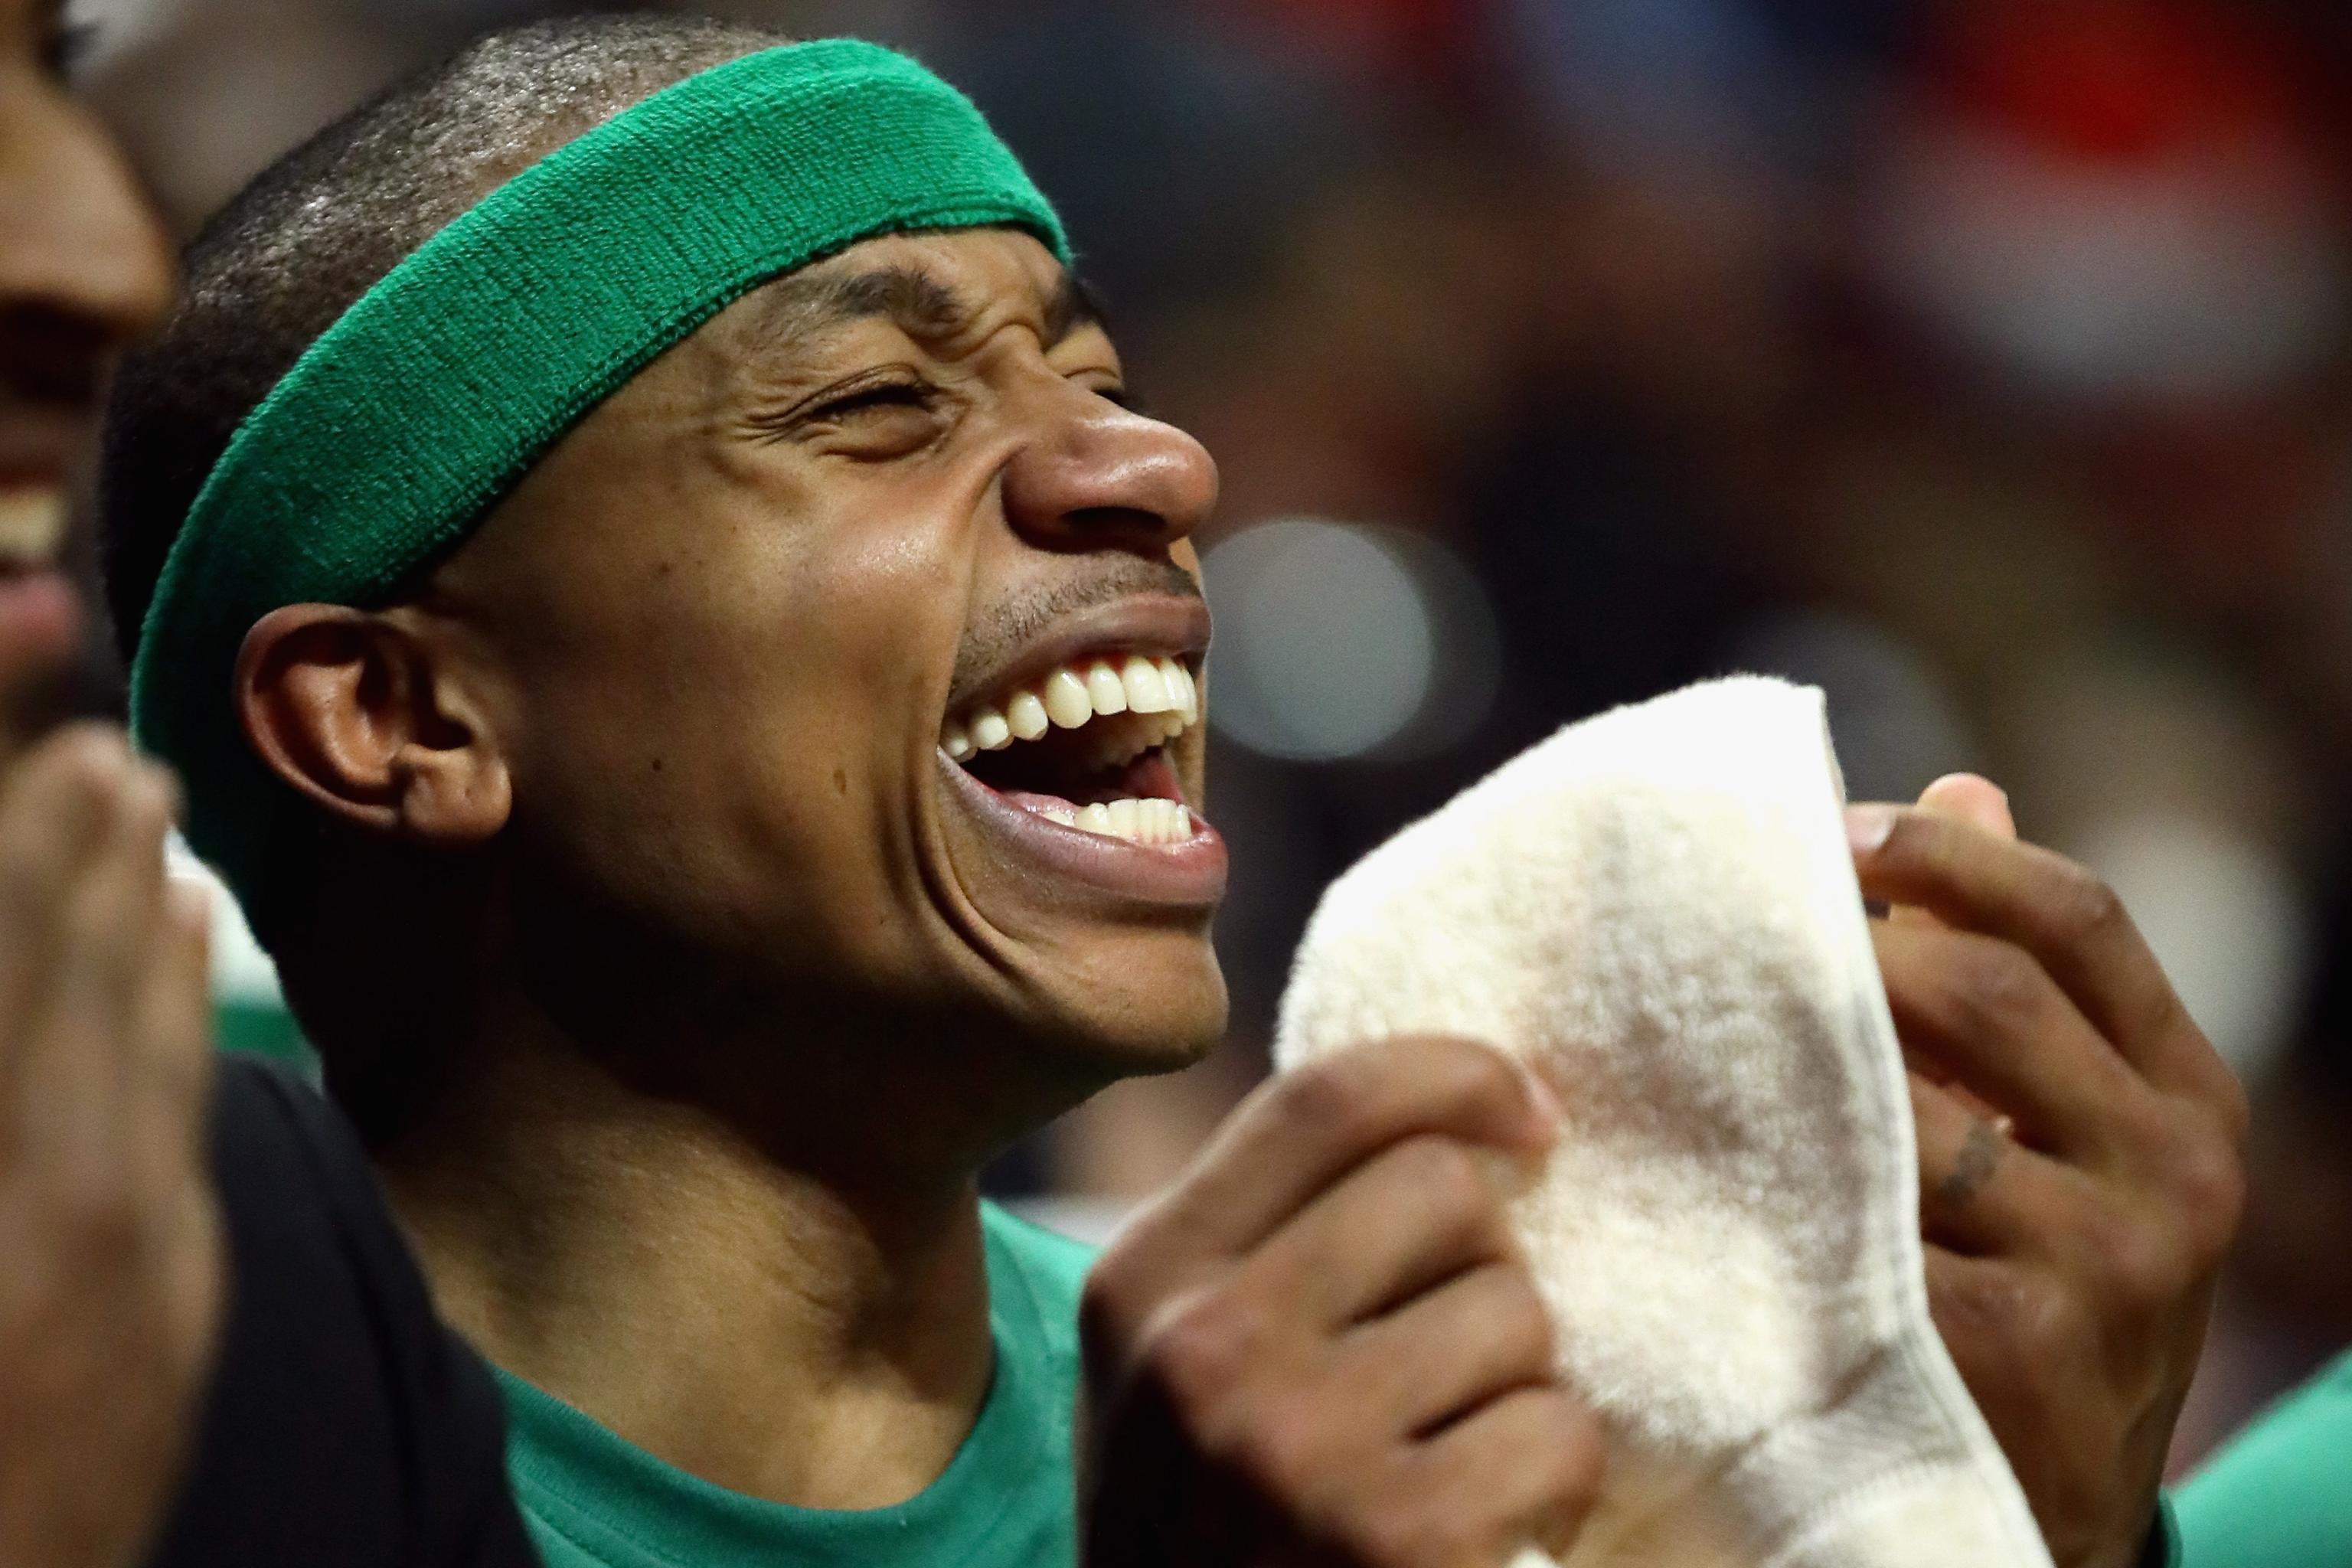 Missing a tooth, Isaiah Thomas has significant dental work - The Boston  Globe